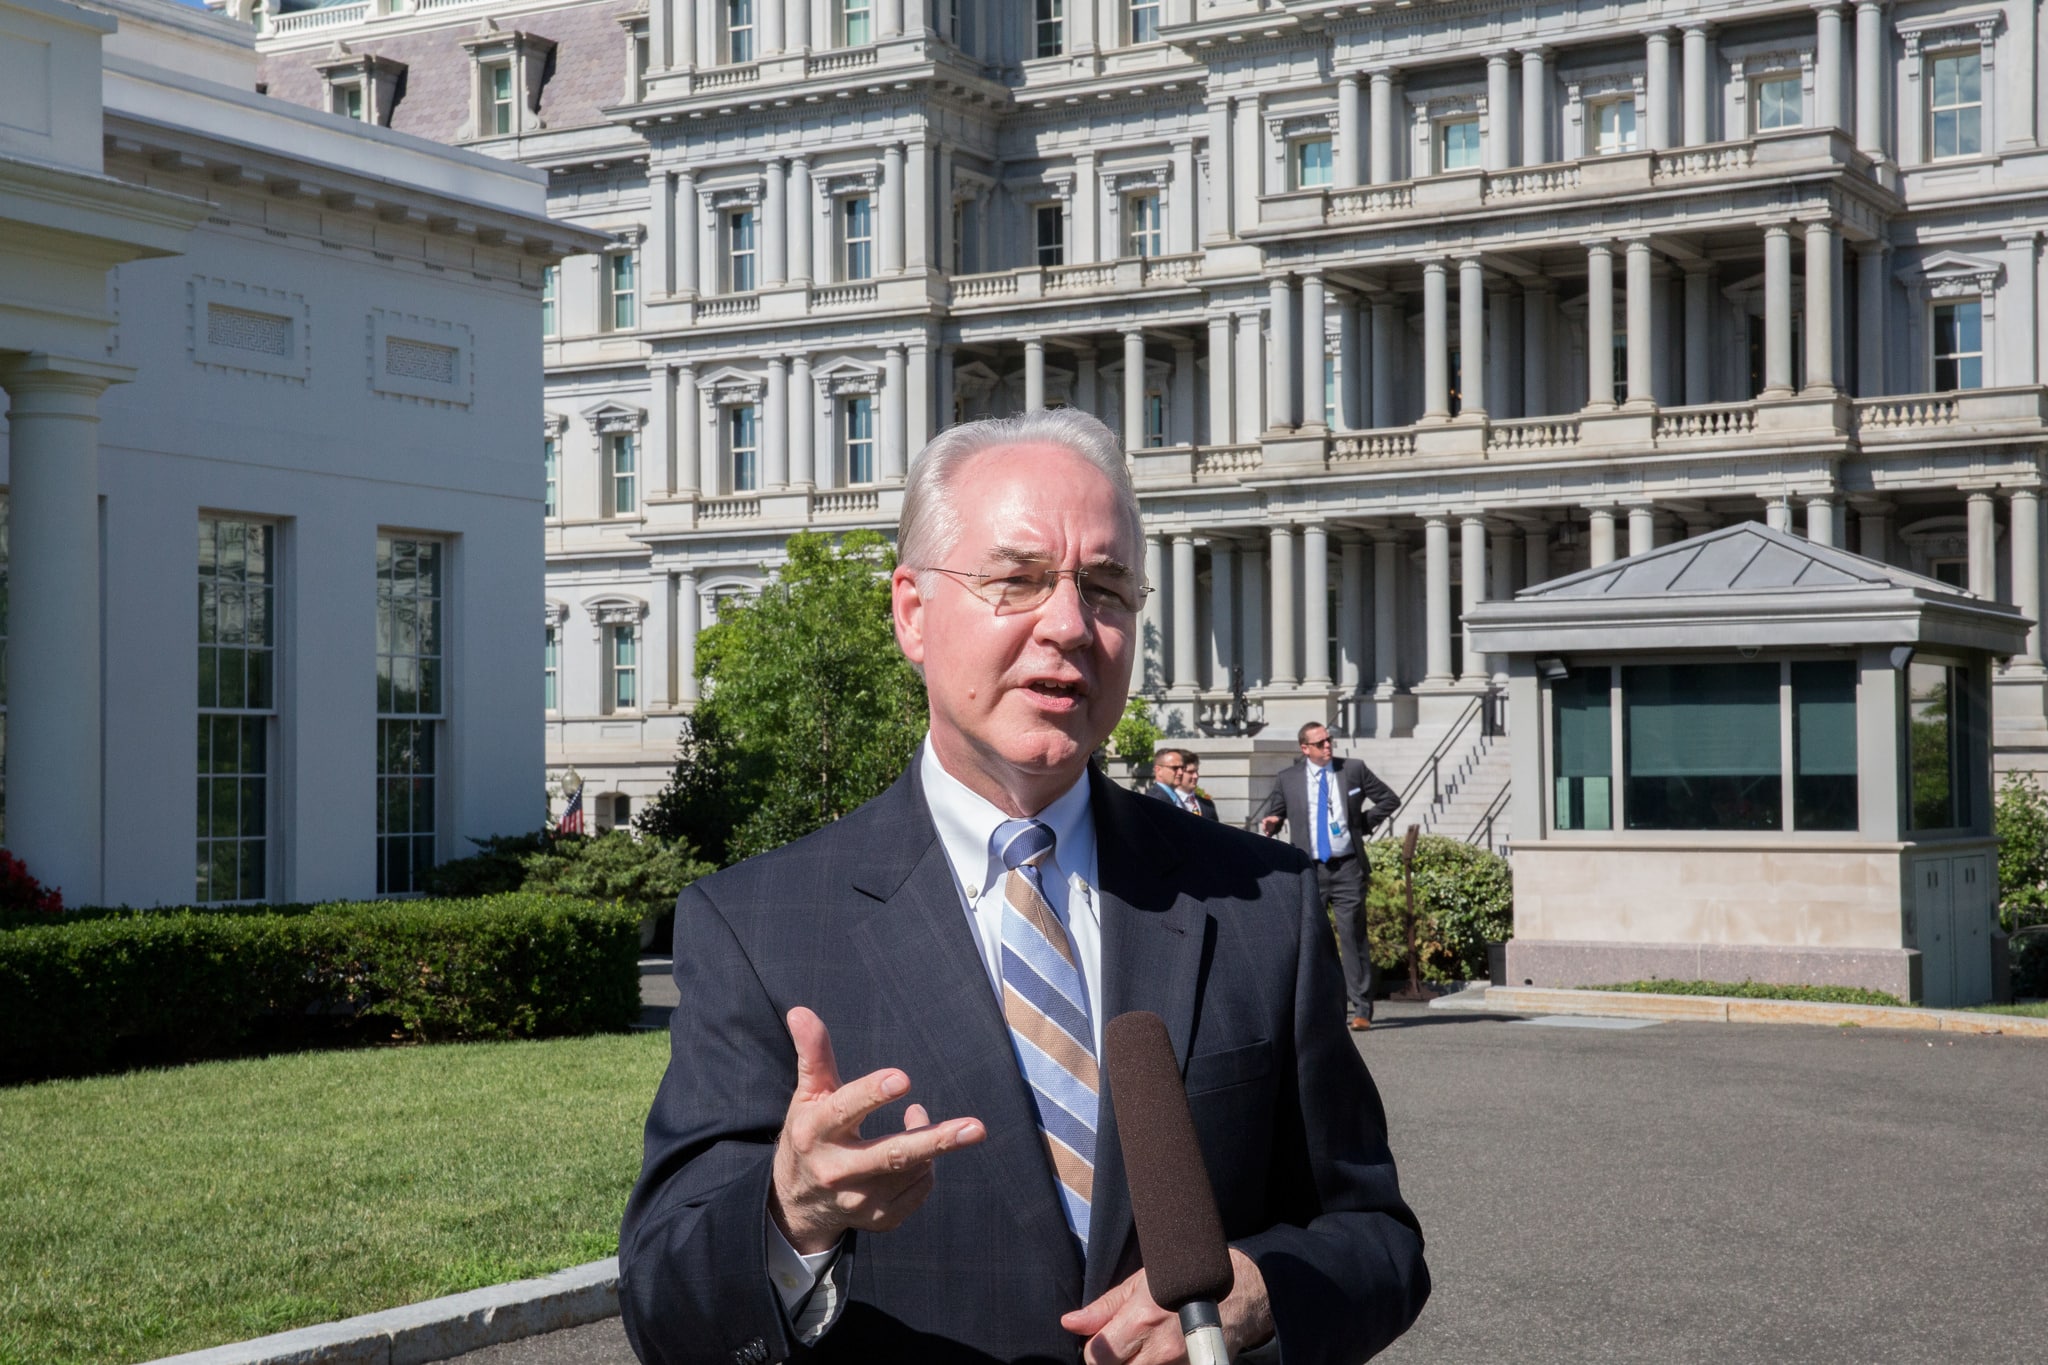 The Public Record: Did Tom Price say eliminating the individual mandate would increase insurance costs?